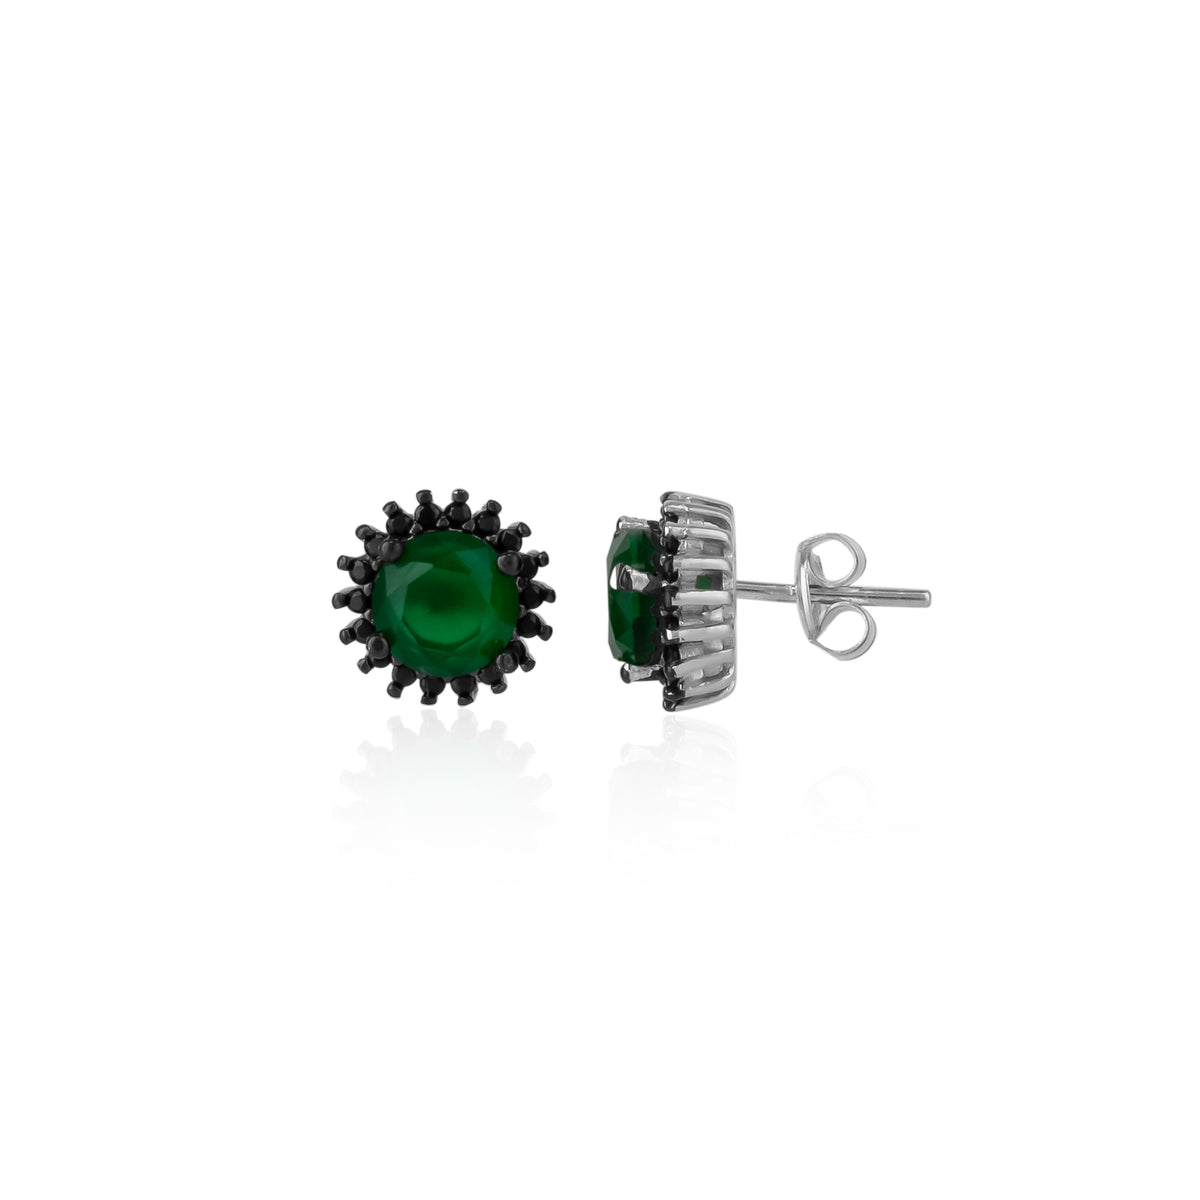 Black Emerald Color Stud Earring in Sterling Silver